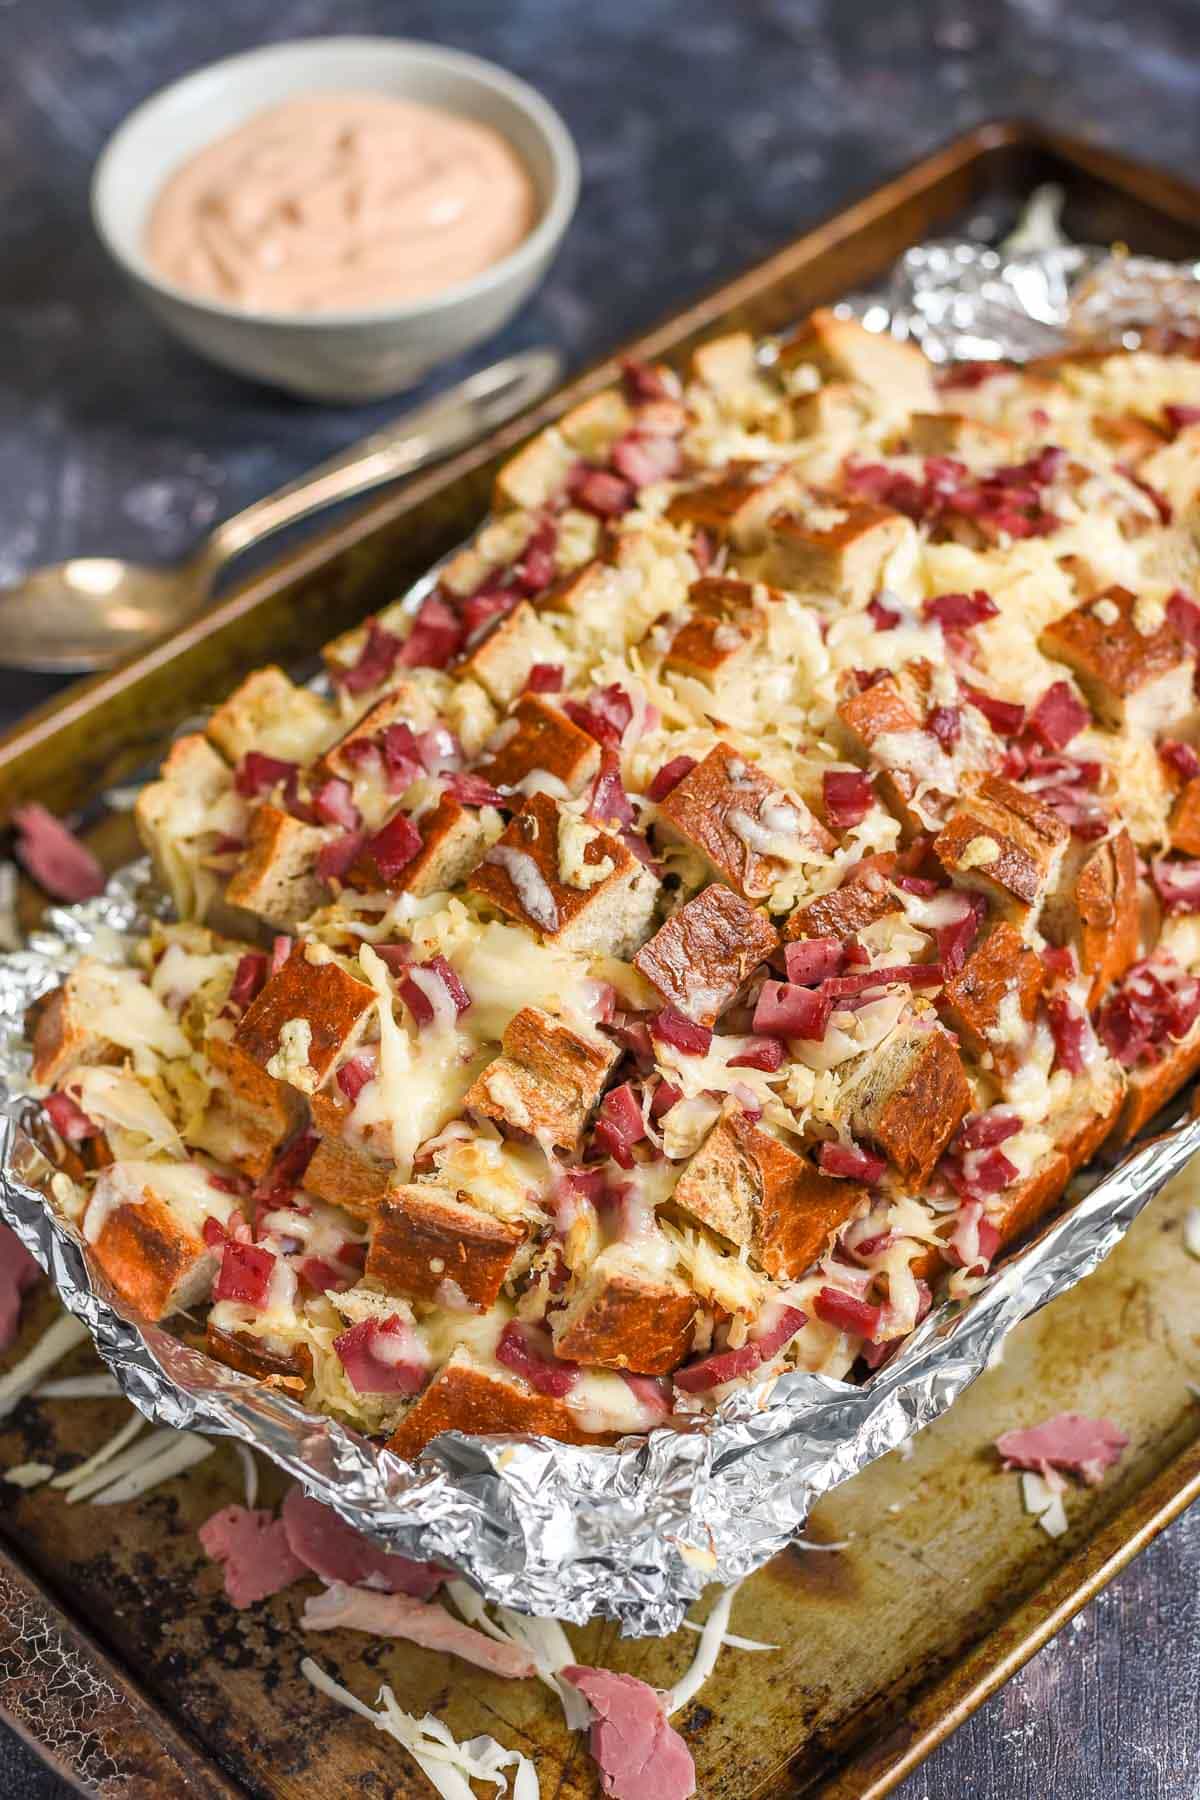 Make this Pull Apart Reuben Bread as an appetizer or dinner. Either way it will disappear fast!